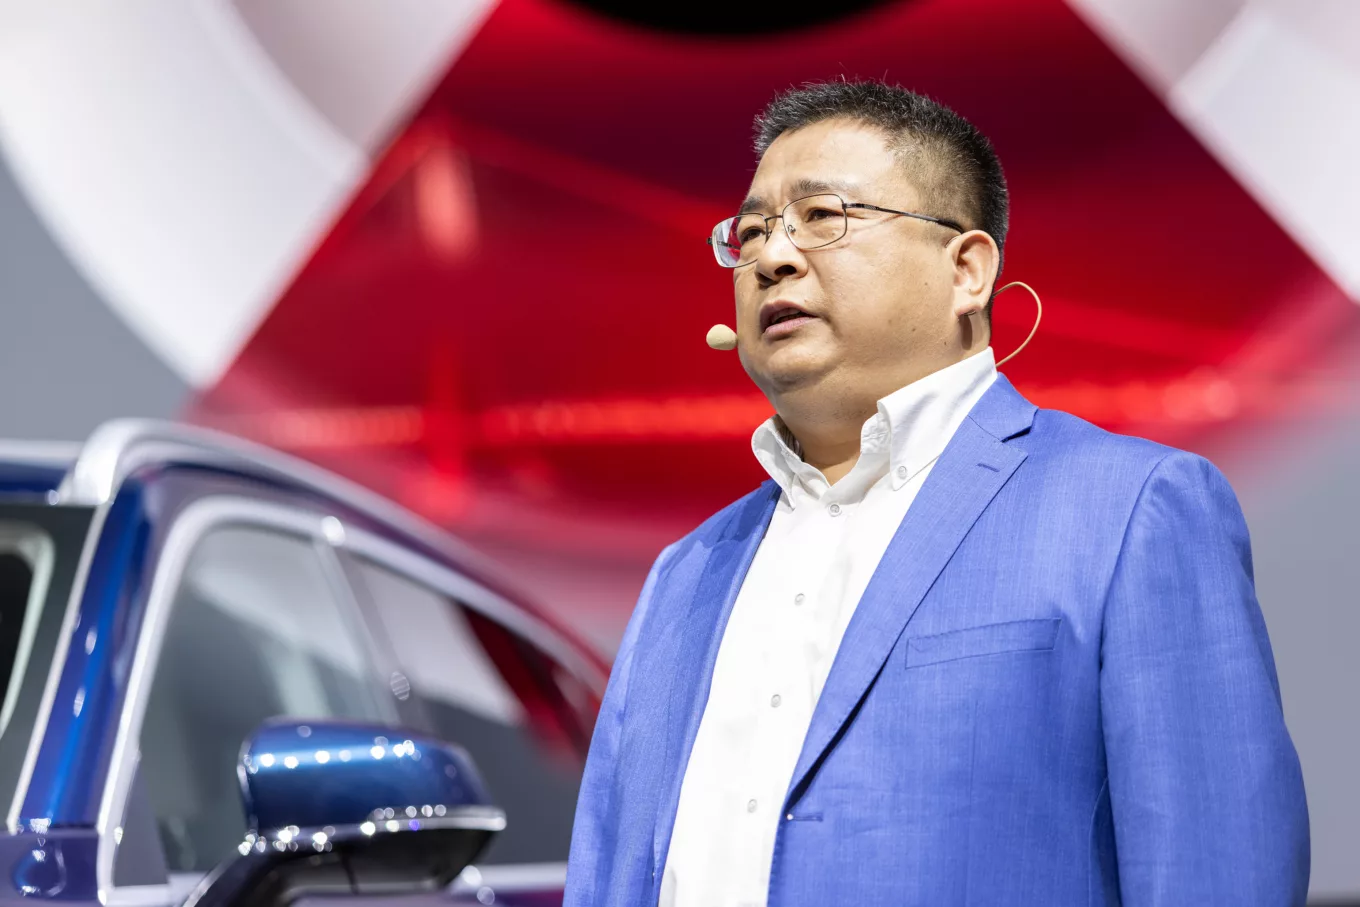 Press Conference Paris Motor Show Mr Meng | Press Service Center Great Wall Motor. Europe